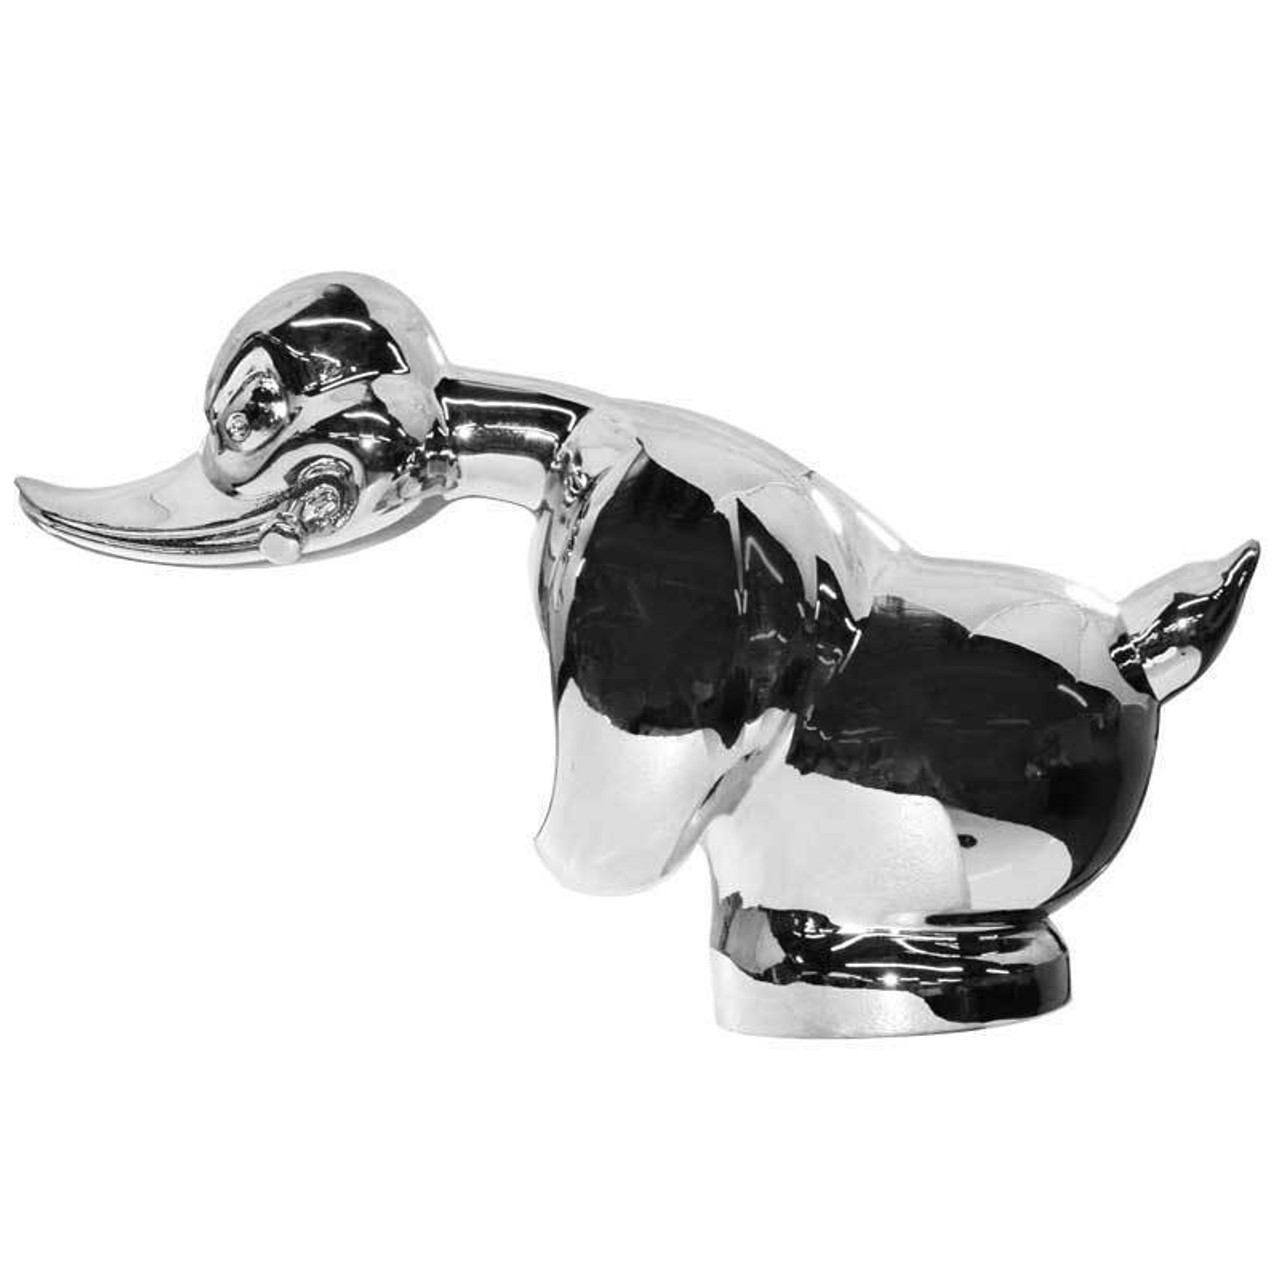 Convoy Duck Hood Ornament (Chrome ) Made in USA - Authentic - UATPARTS